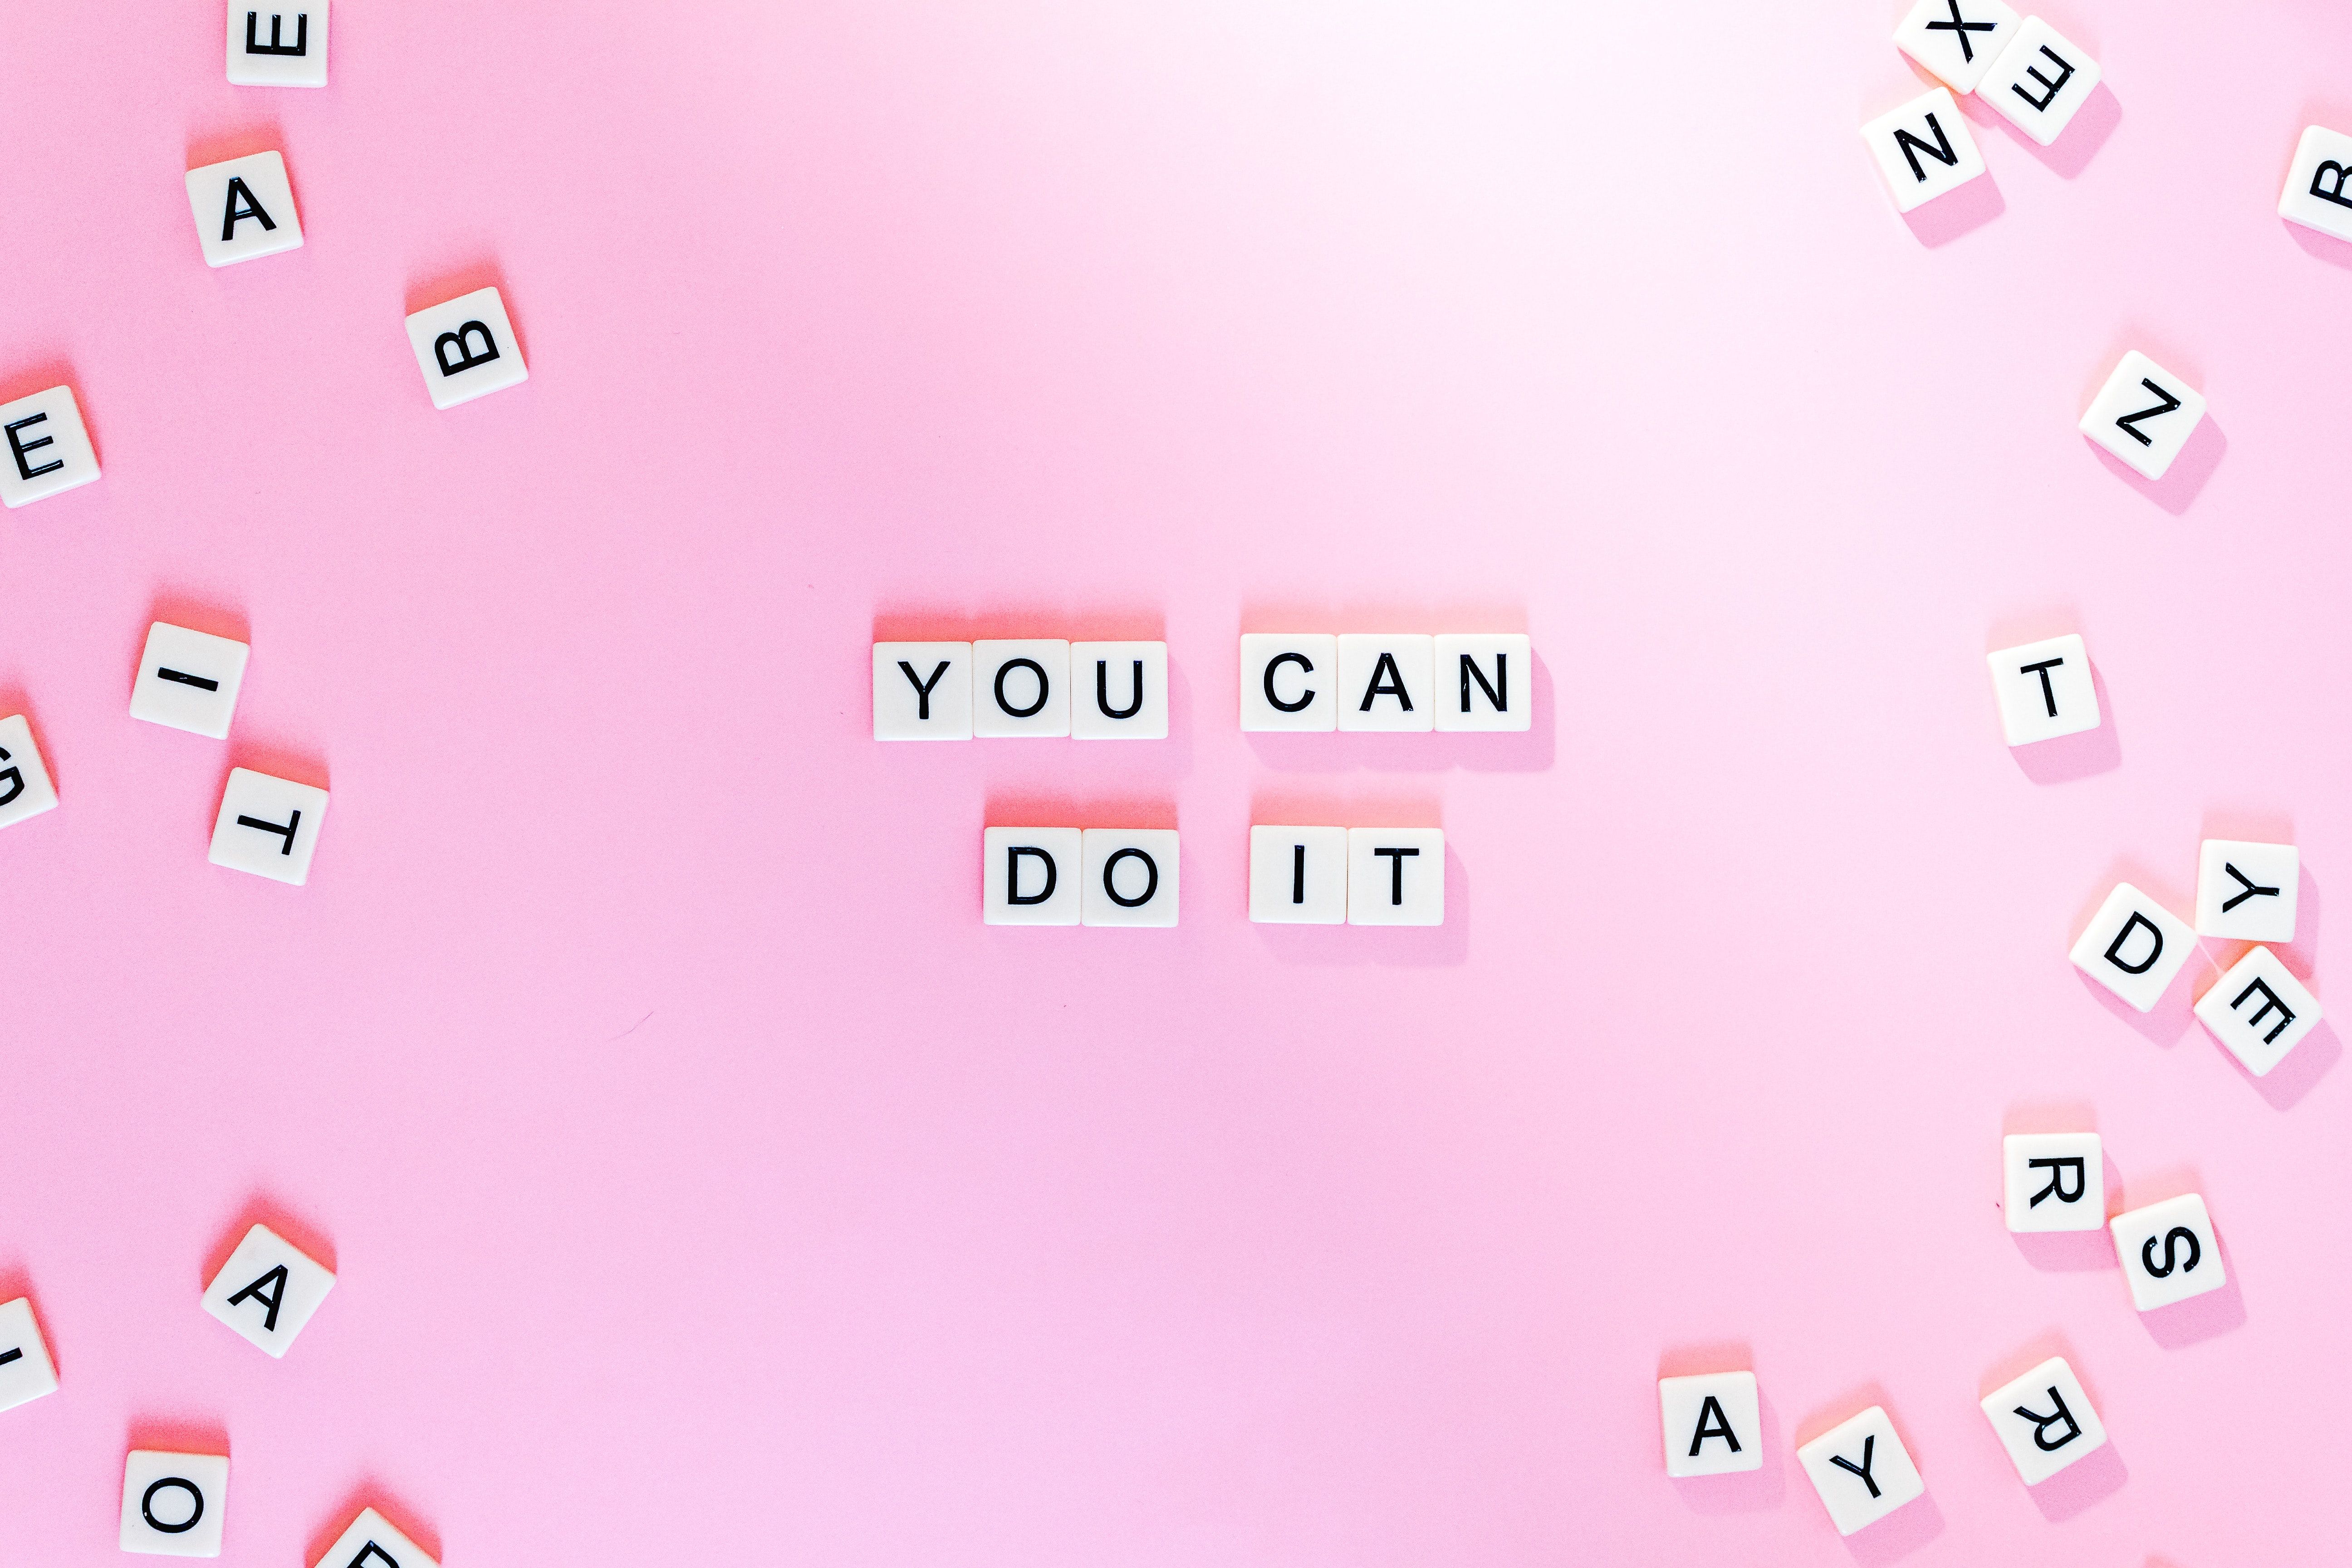 You Can Do It 4K Wallpaper, Pink background, Girly background, Motivational, Popular quotes, Letters, Quotes